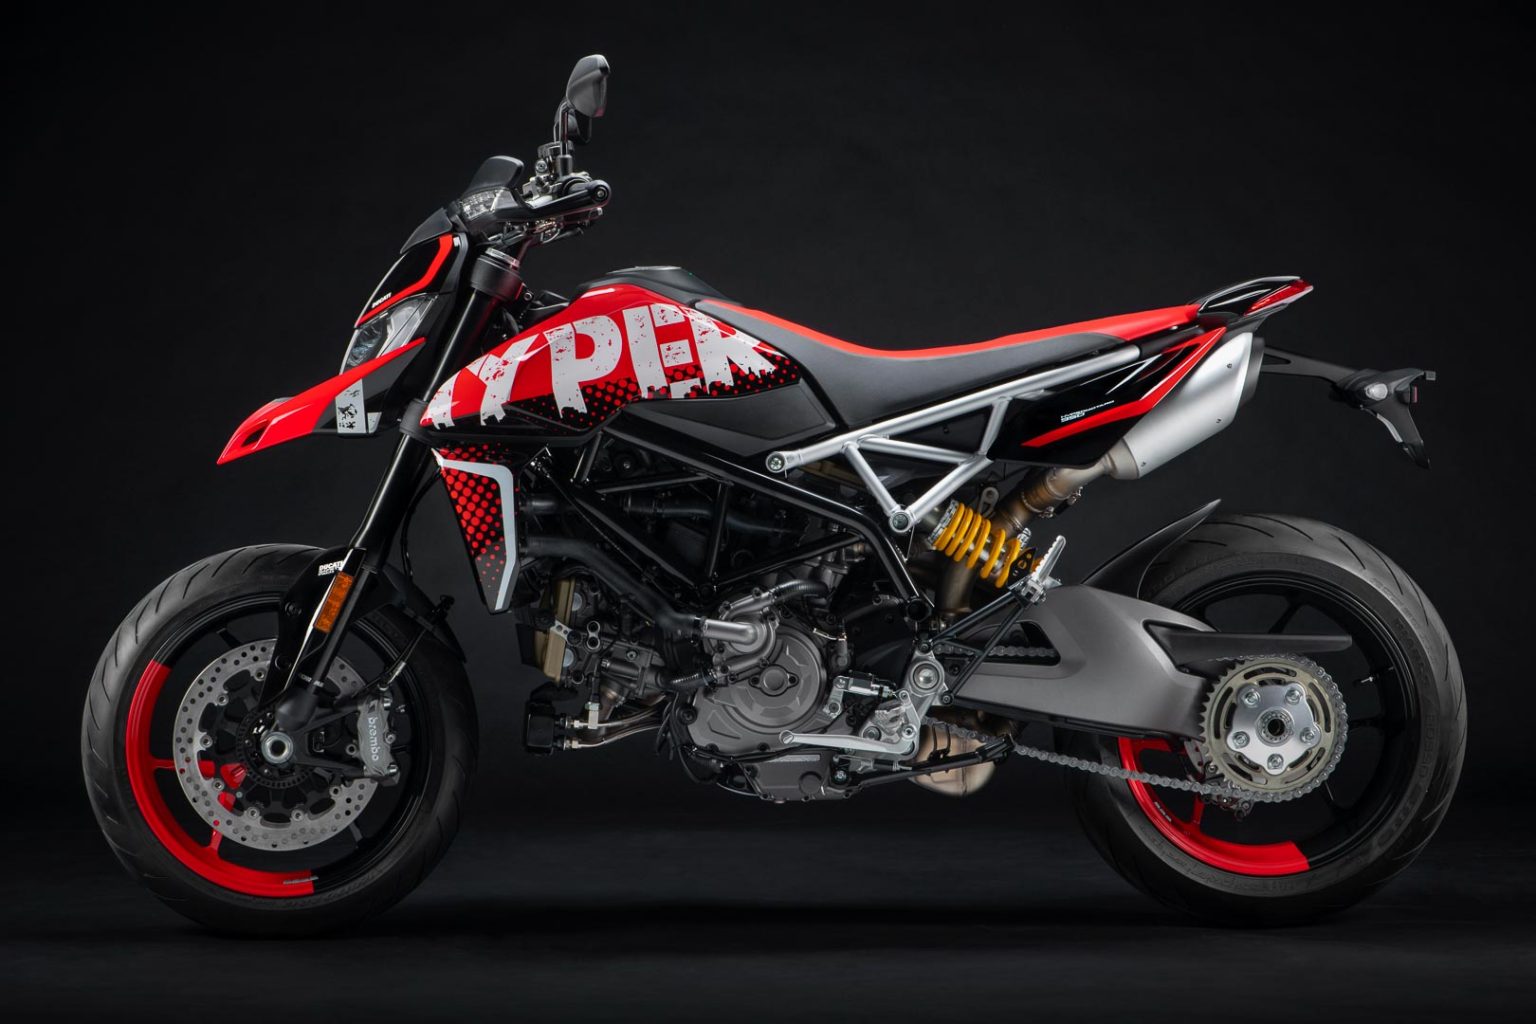 2020 Ducati Hypermotard 950 RVE First Look: Concept to Production ...